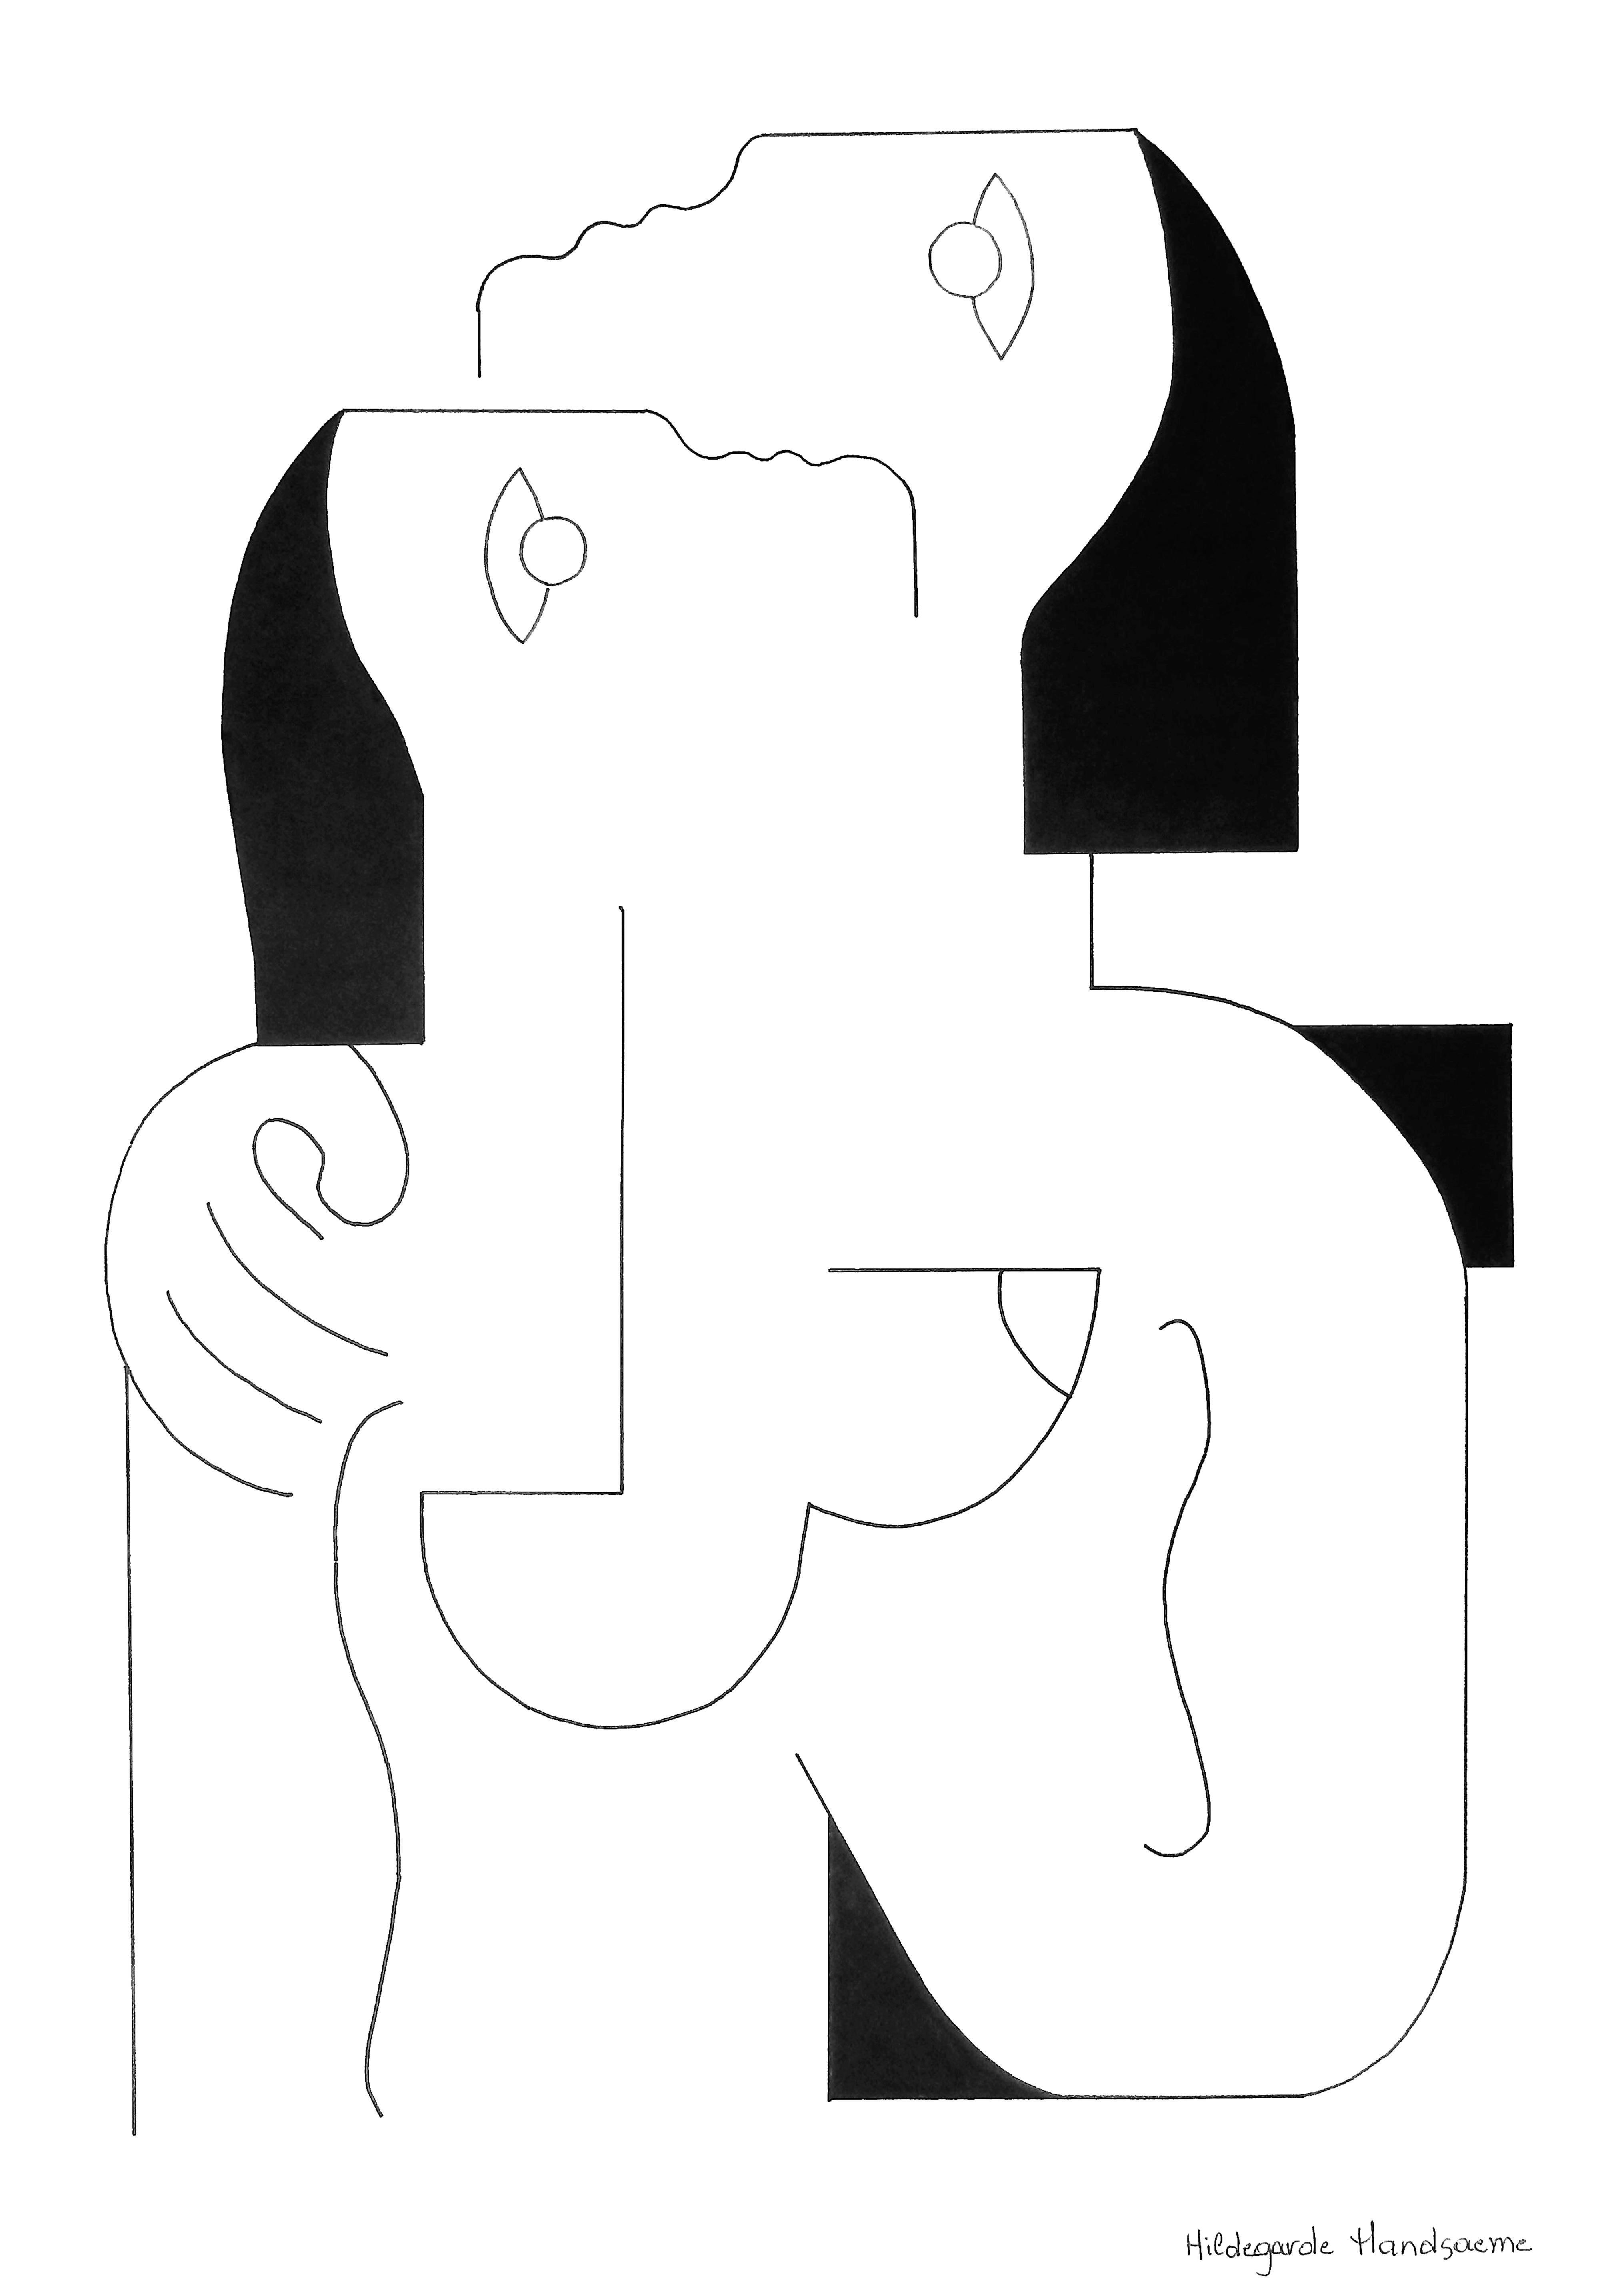 'Tendress' by Hildegarde Handsaeme is a wonderful ink drawing with smooth lines, geometric patterns, and the intimate subject of love and relationship. The work touches us by its perfectly smooth lines and a sense of balance and